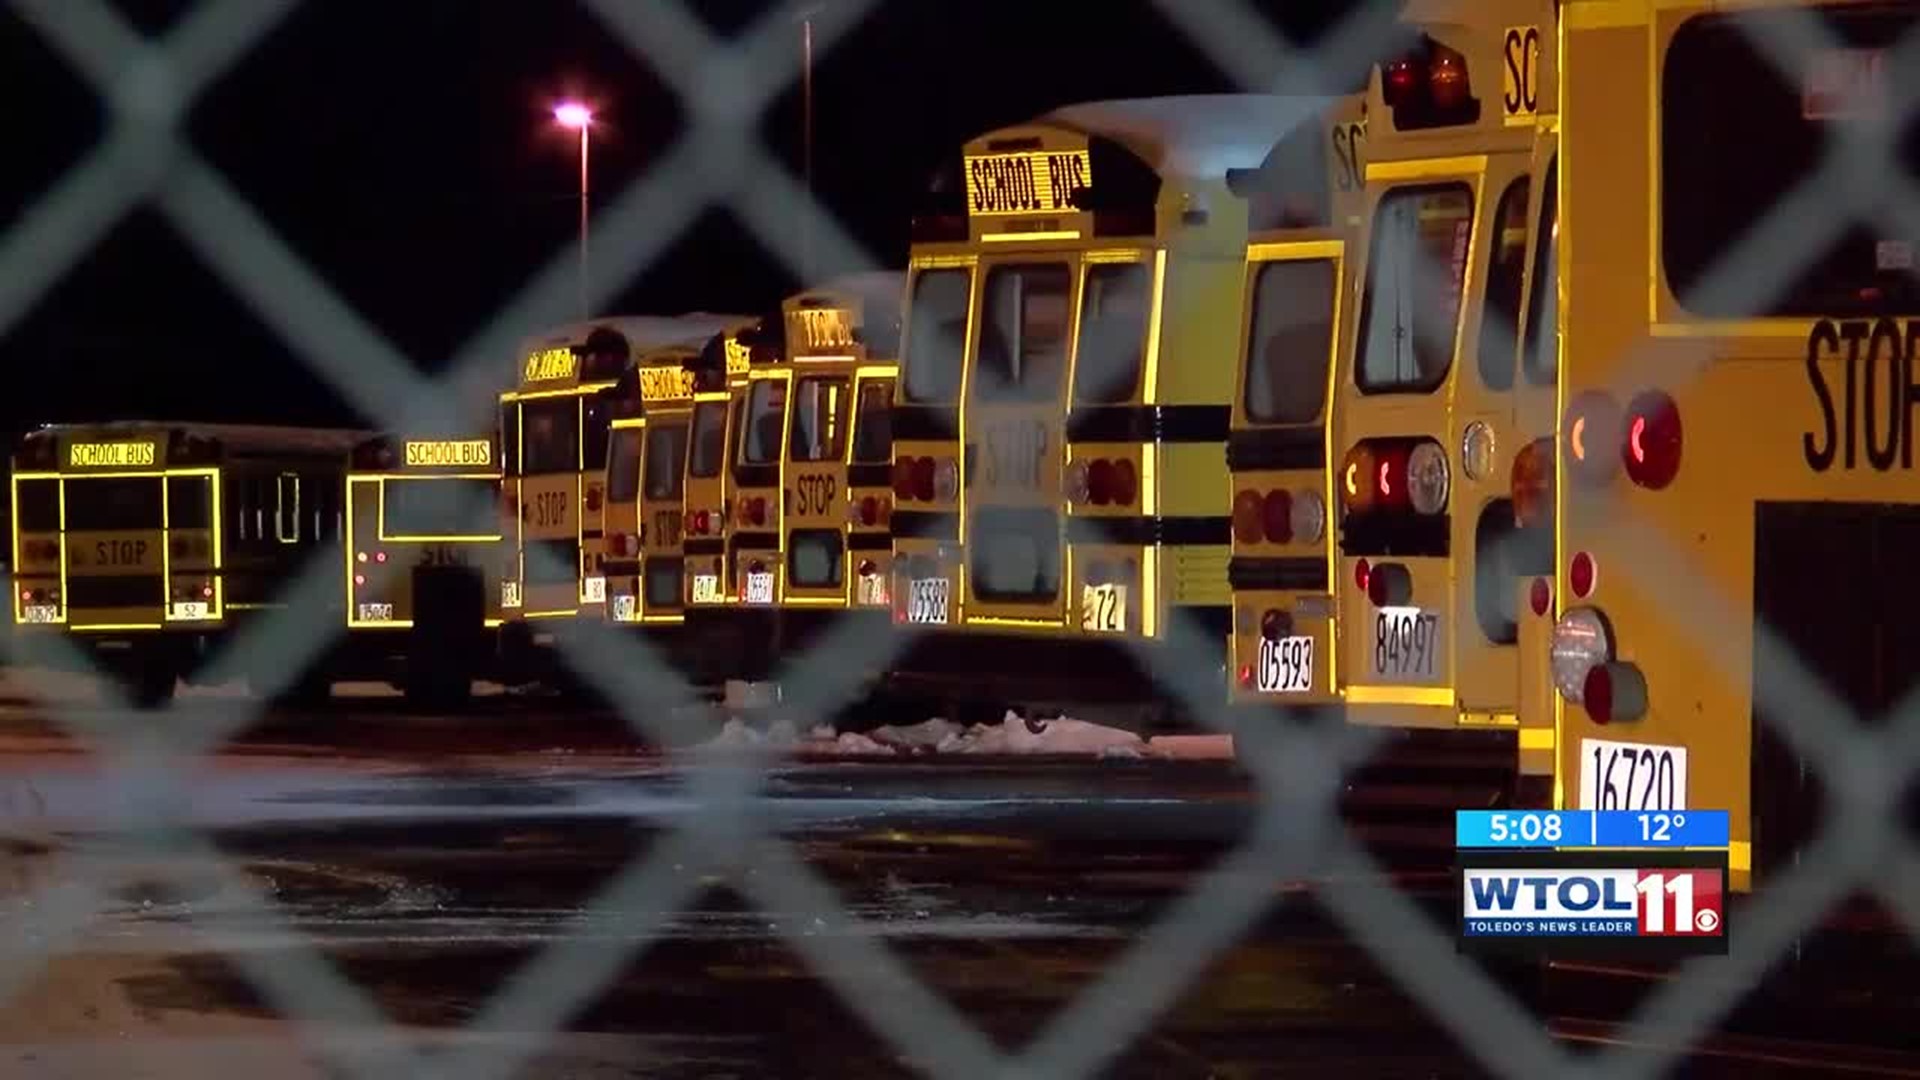 School districts getting busses ready for next week’s bitter cold temperatures